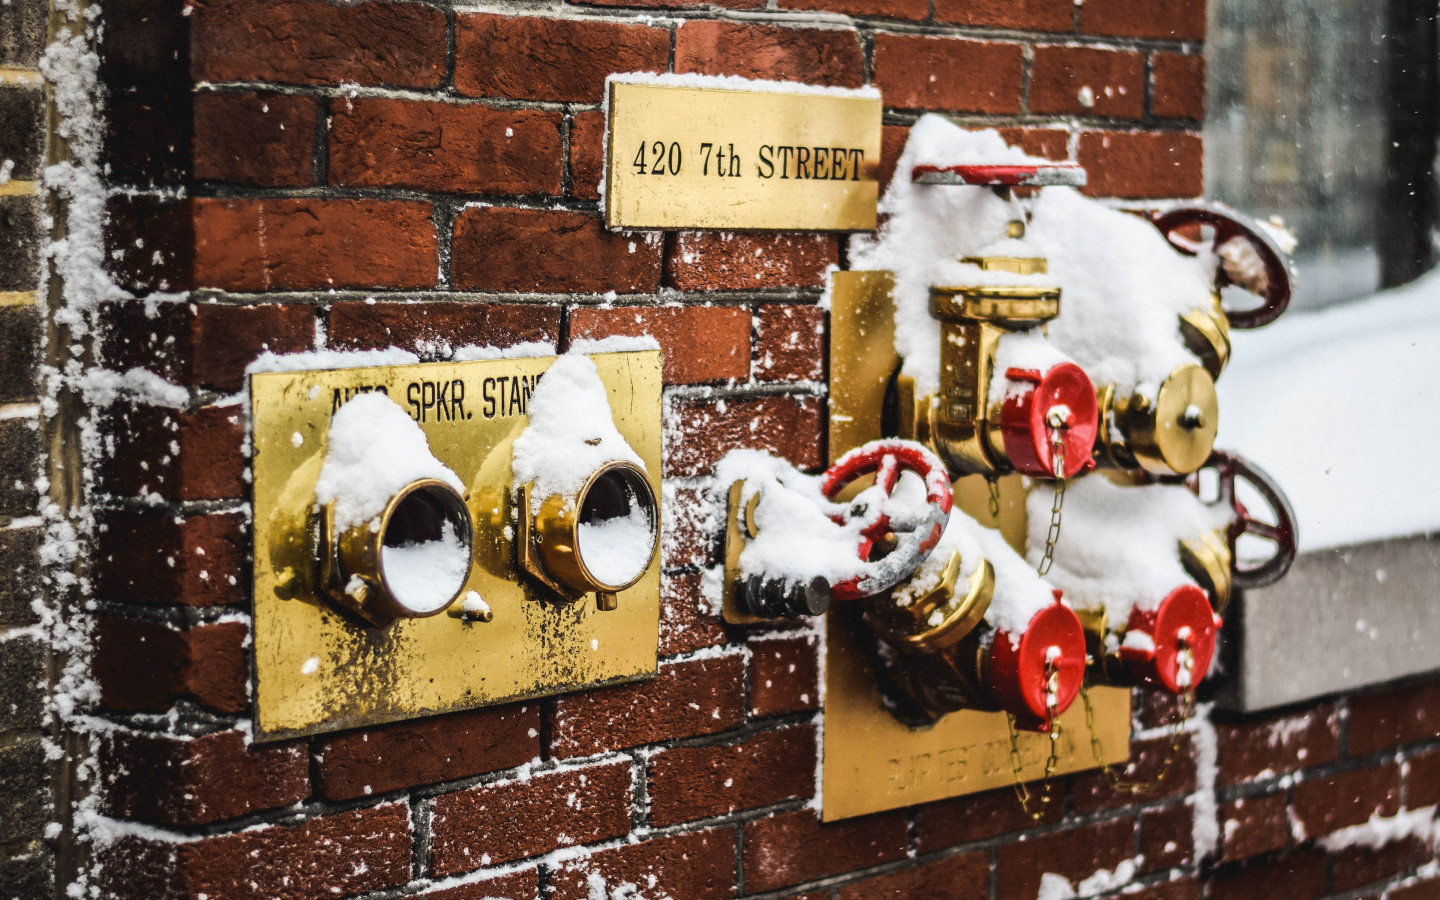 Snow covered fire standpipes in Washington wallpaper 1440x900